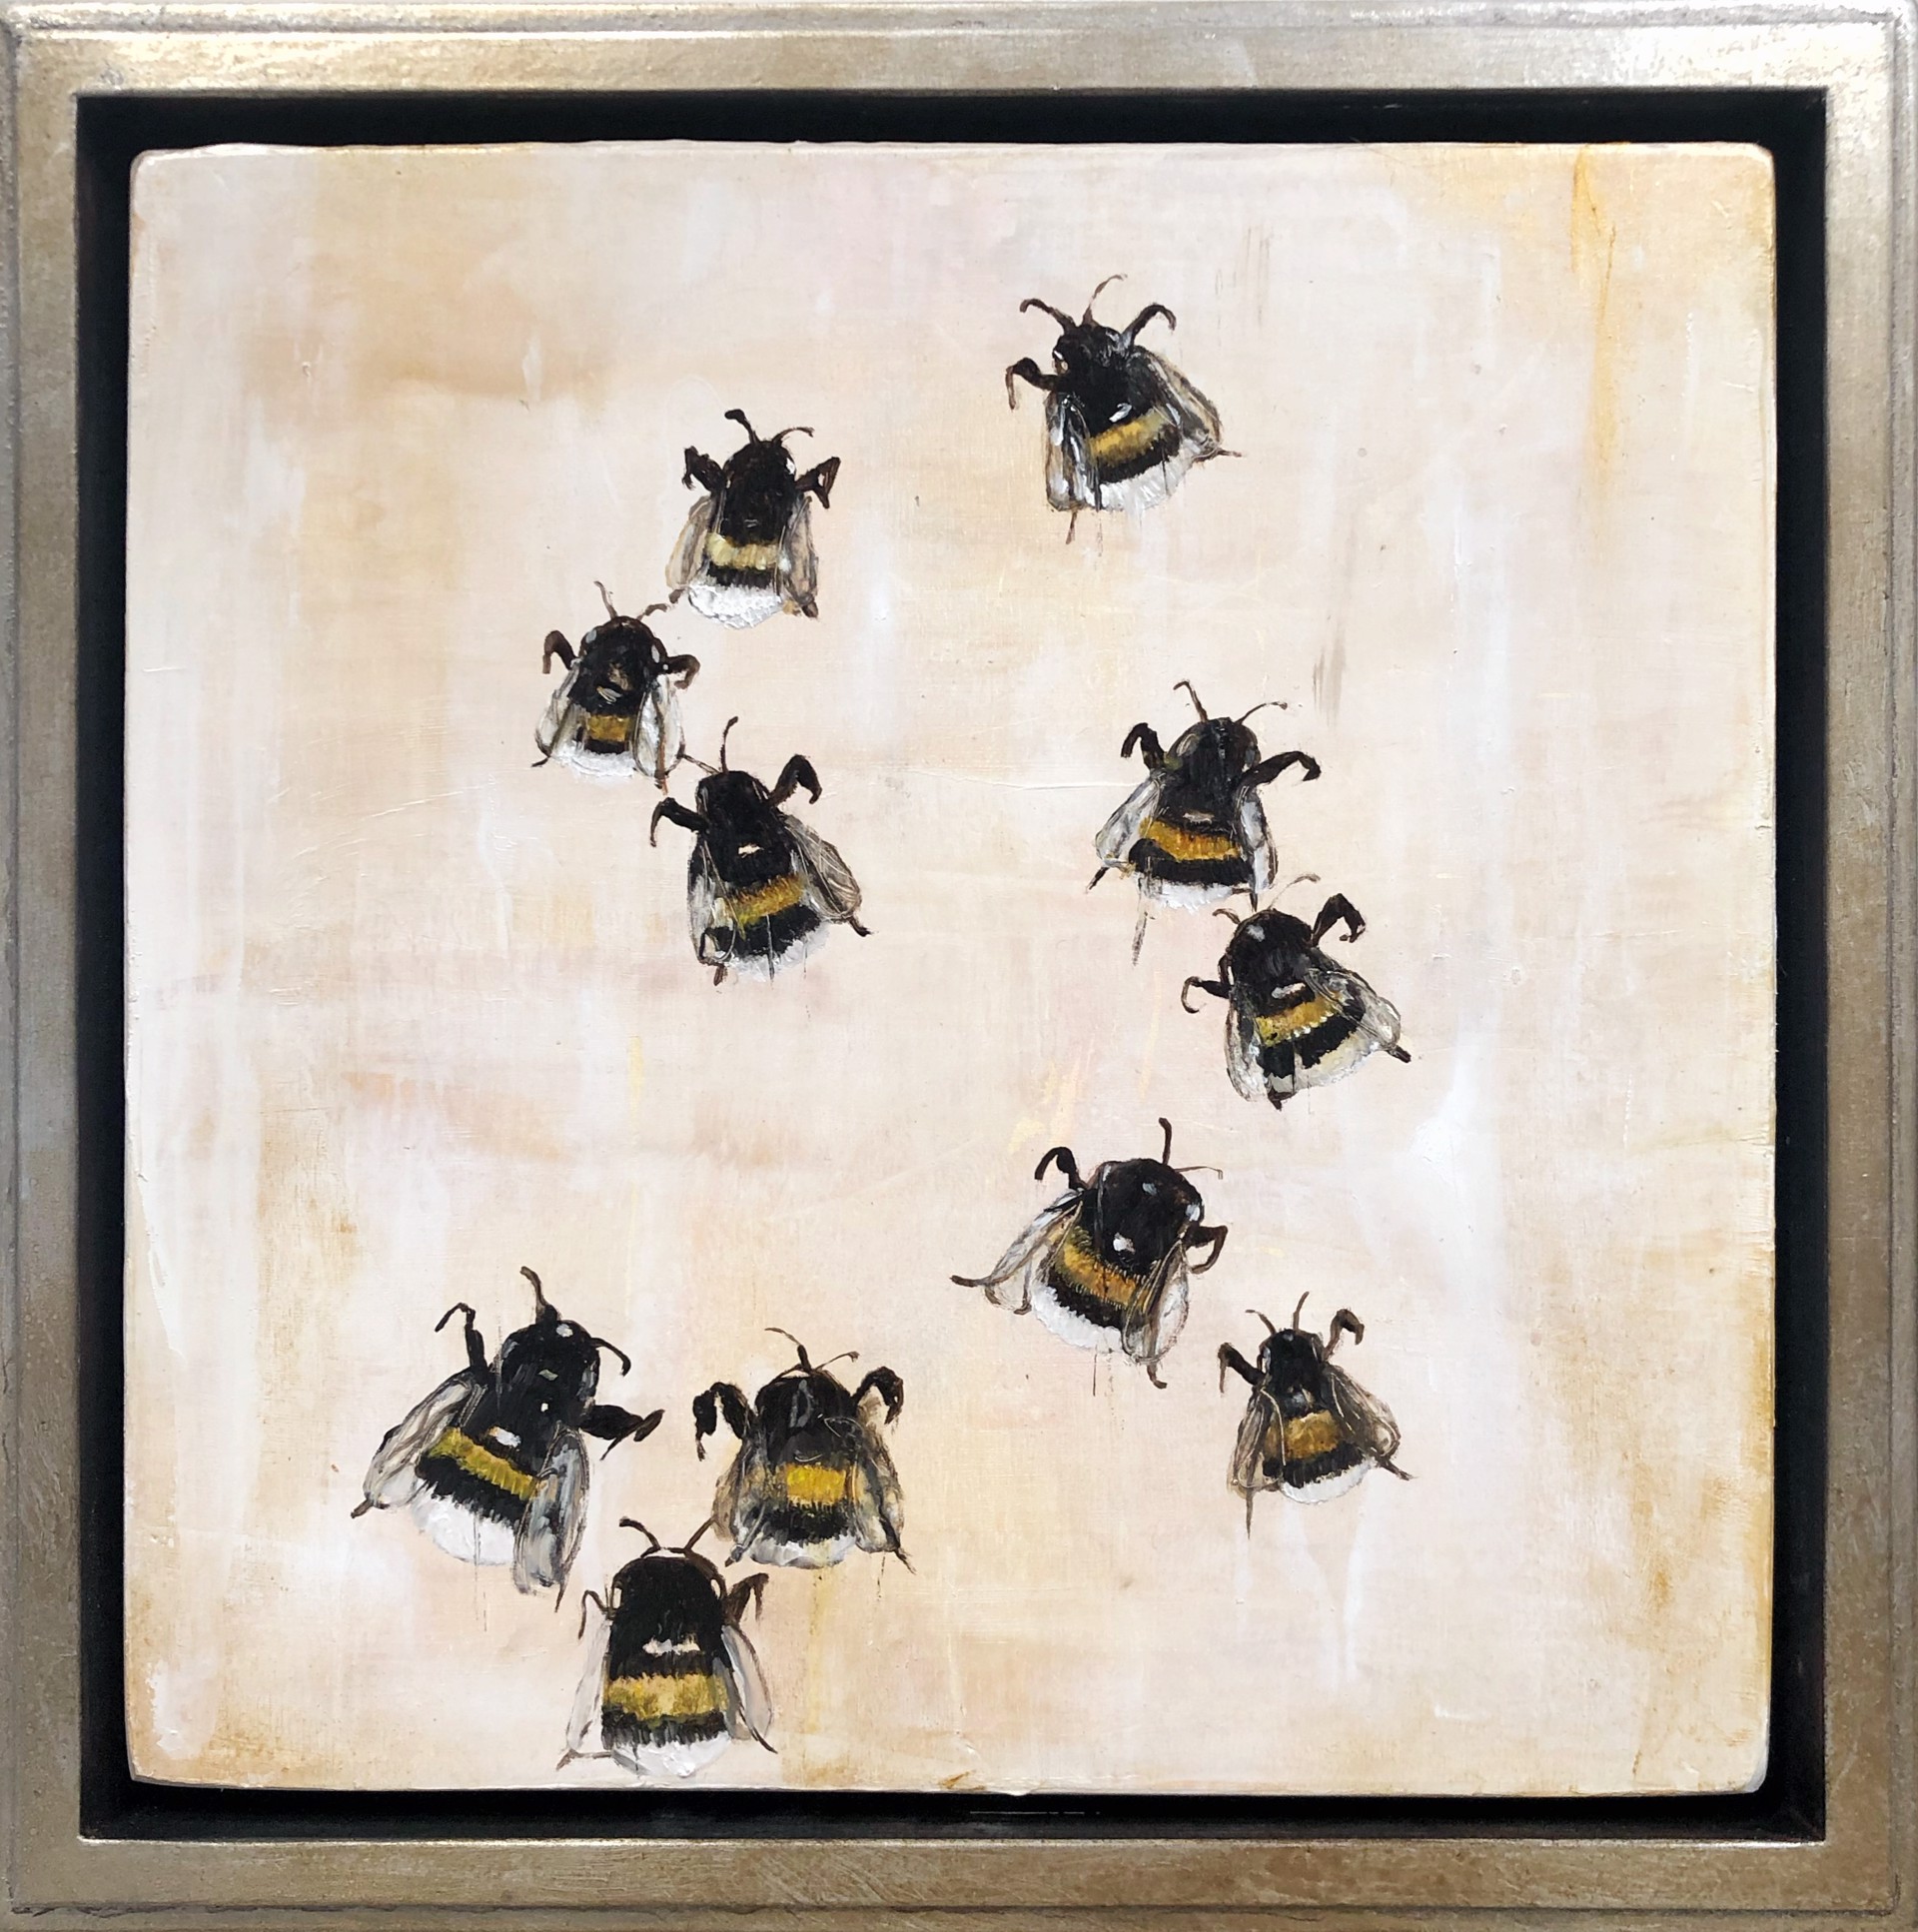 Oil Painting Of Bees On A Contemporary Warm Cream And White Background With A Warm Silver Frame, By Jenna Von Benedikt